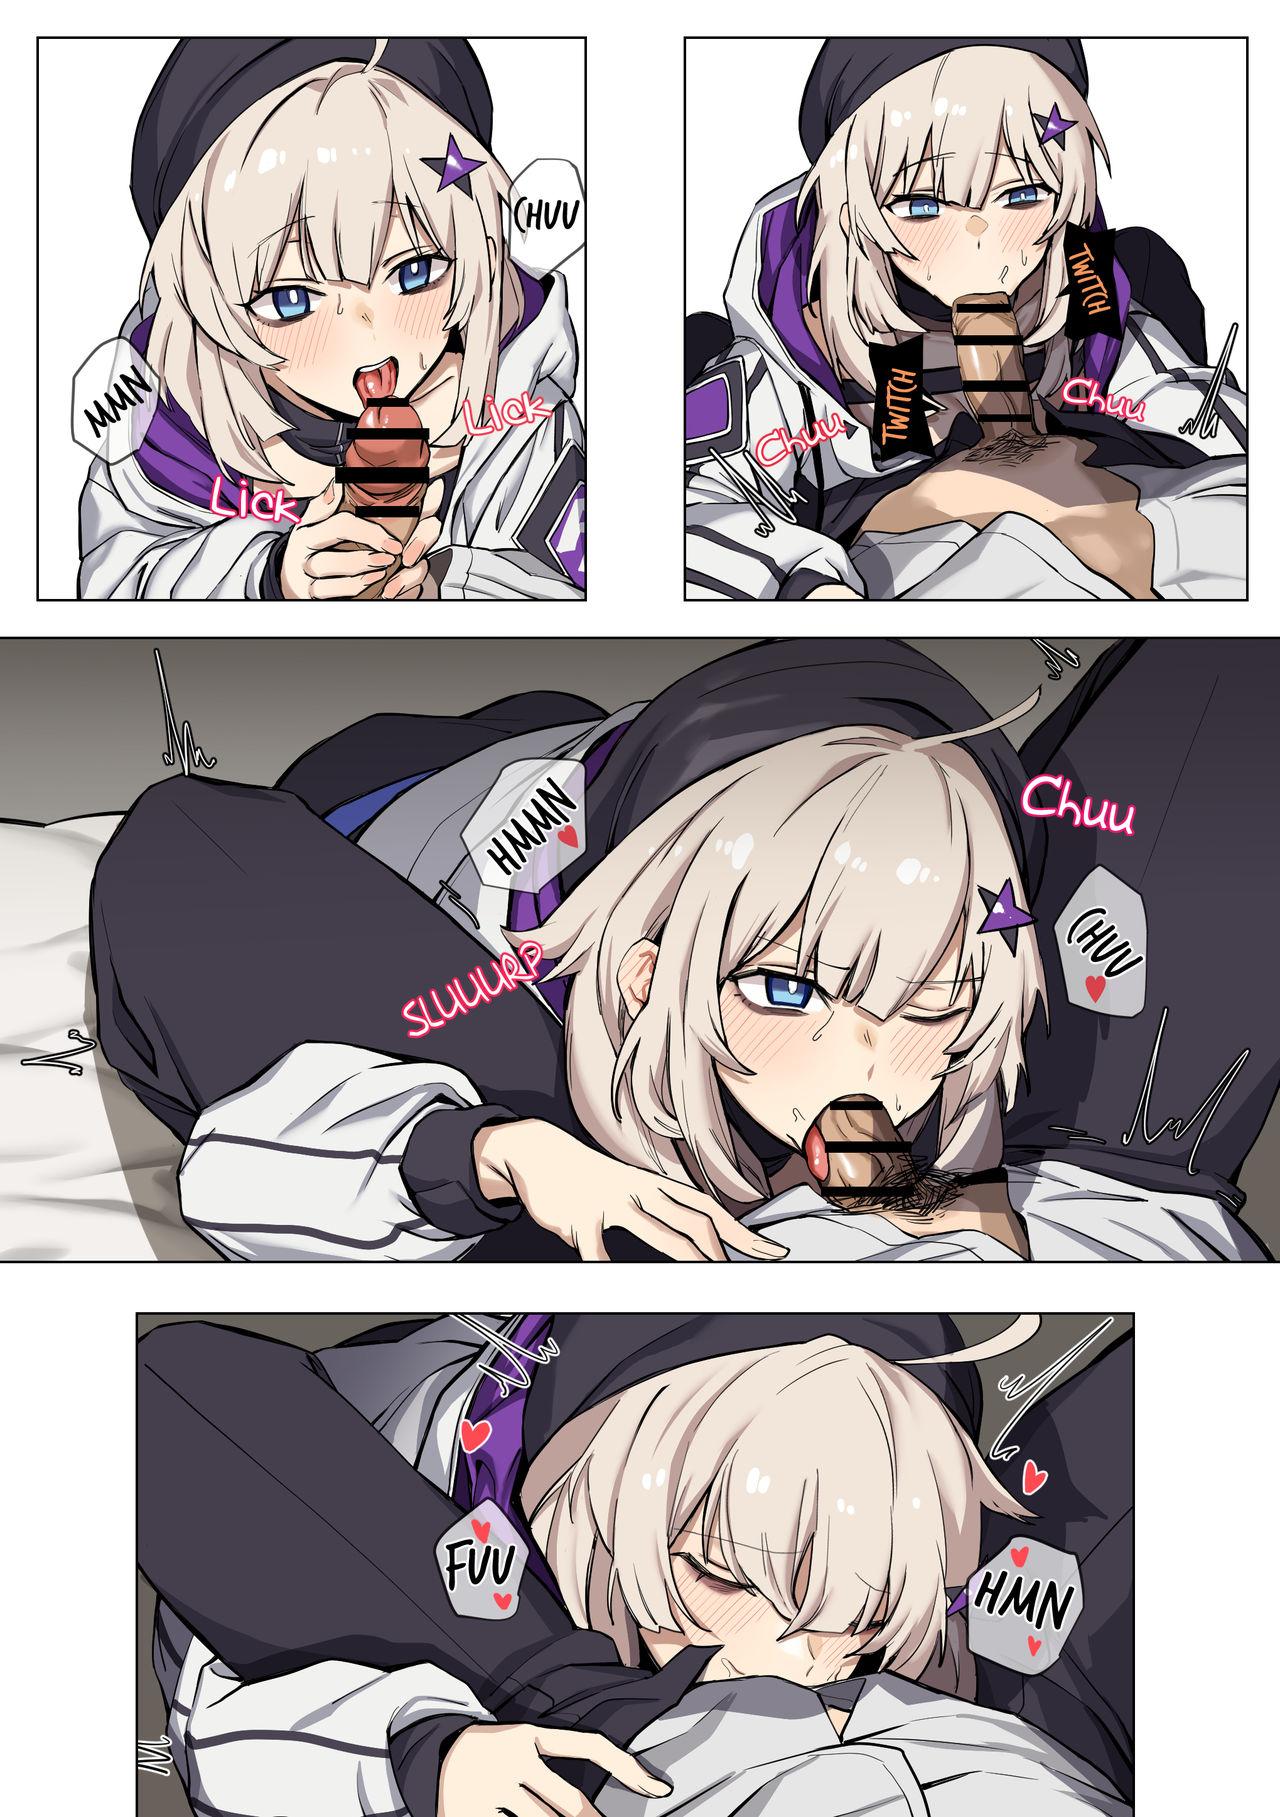 Big Dick aa12 - Girls frontline Barely 18 Porn - Page 4